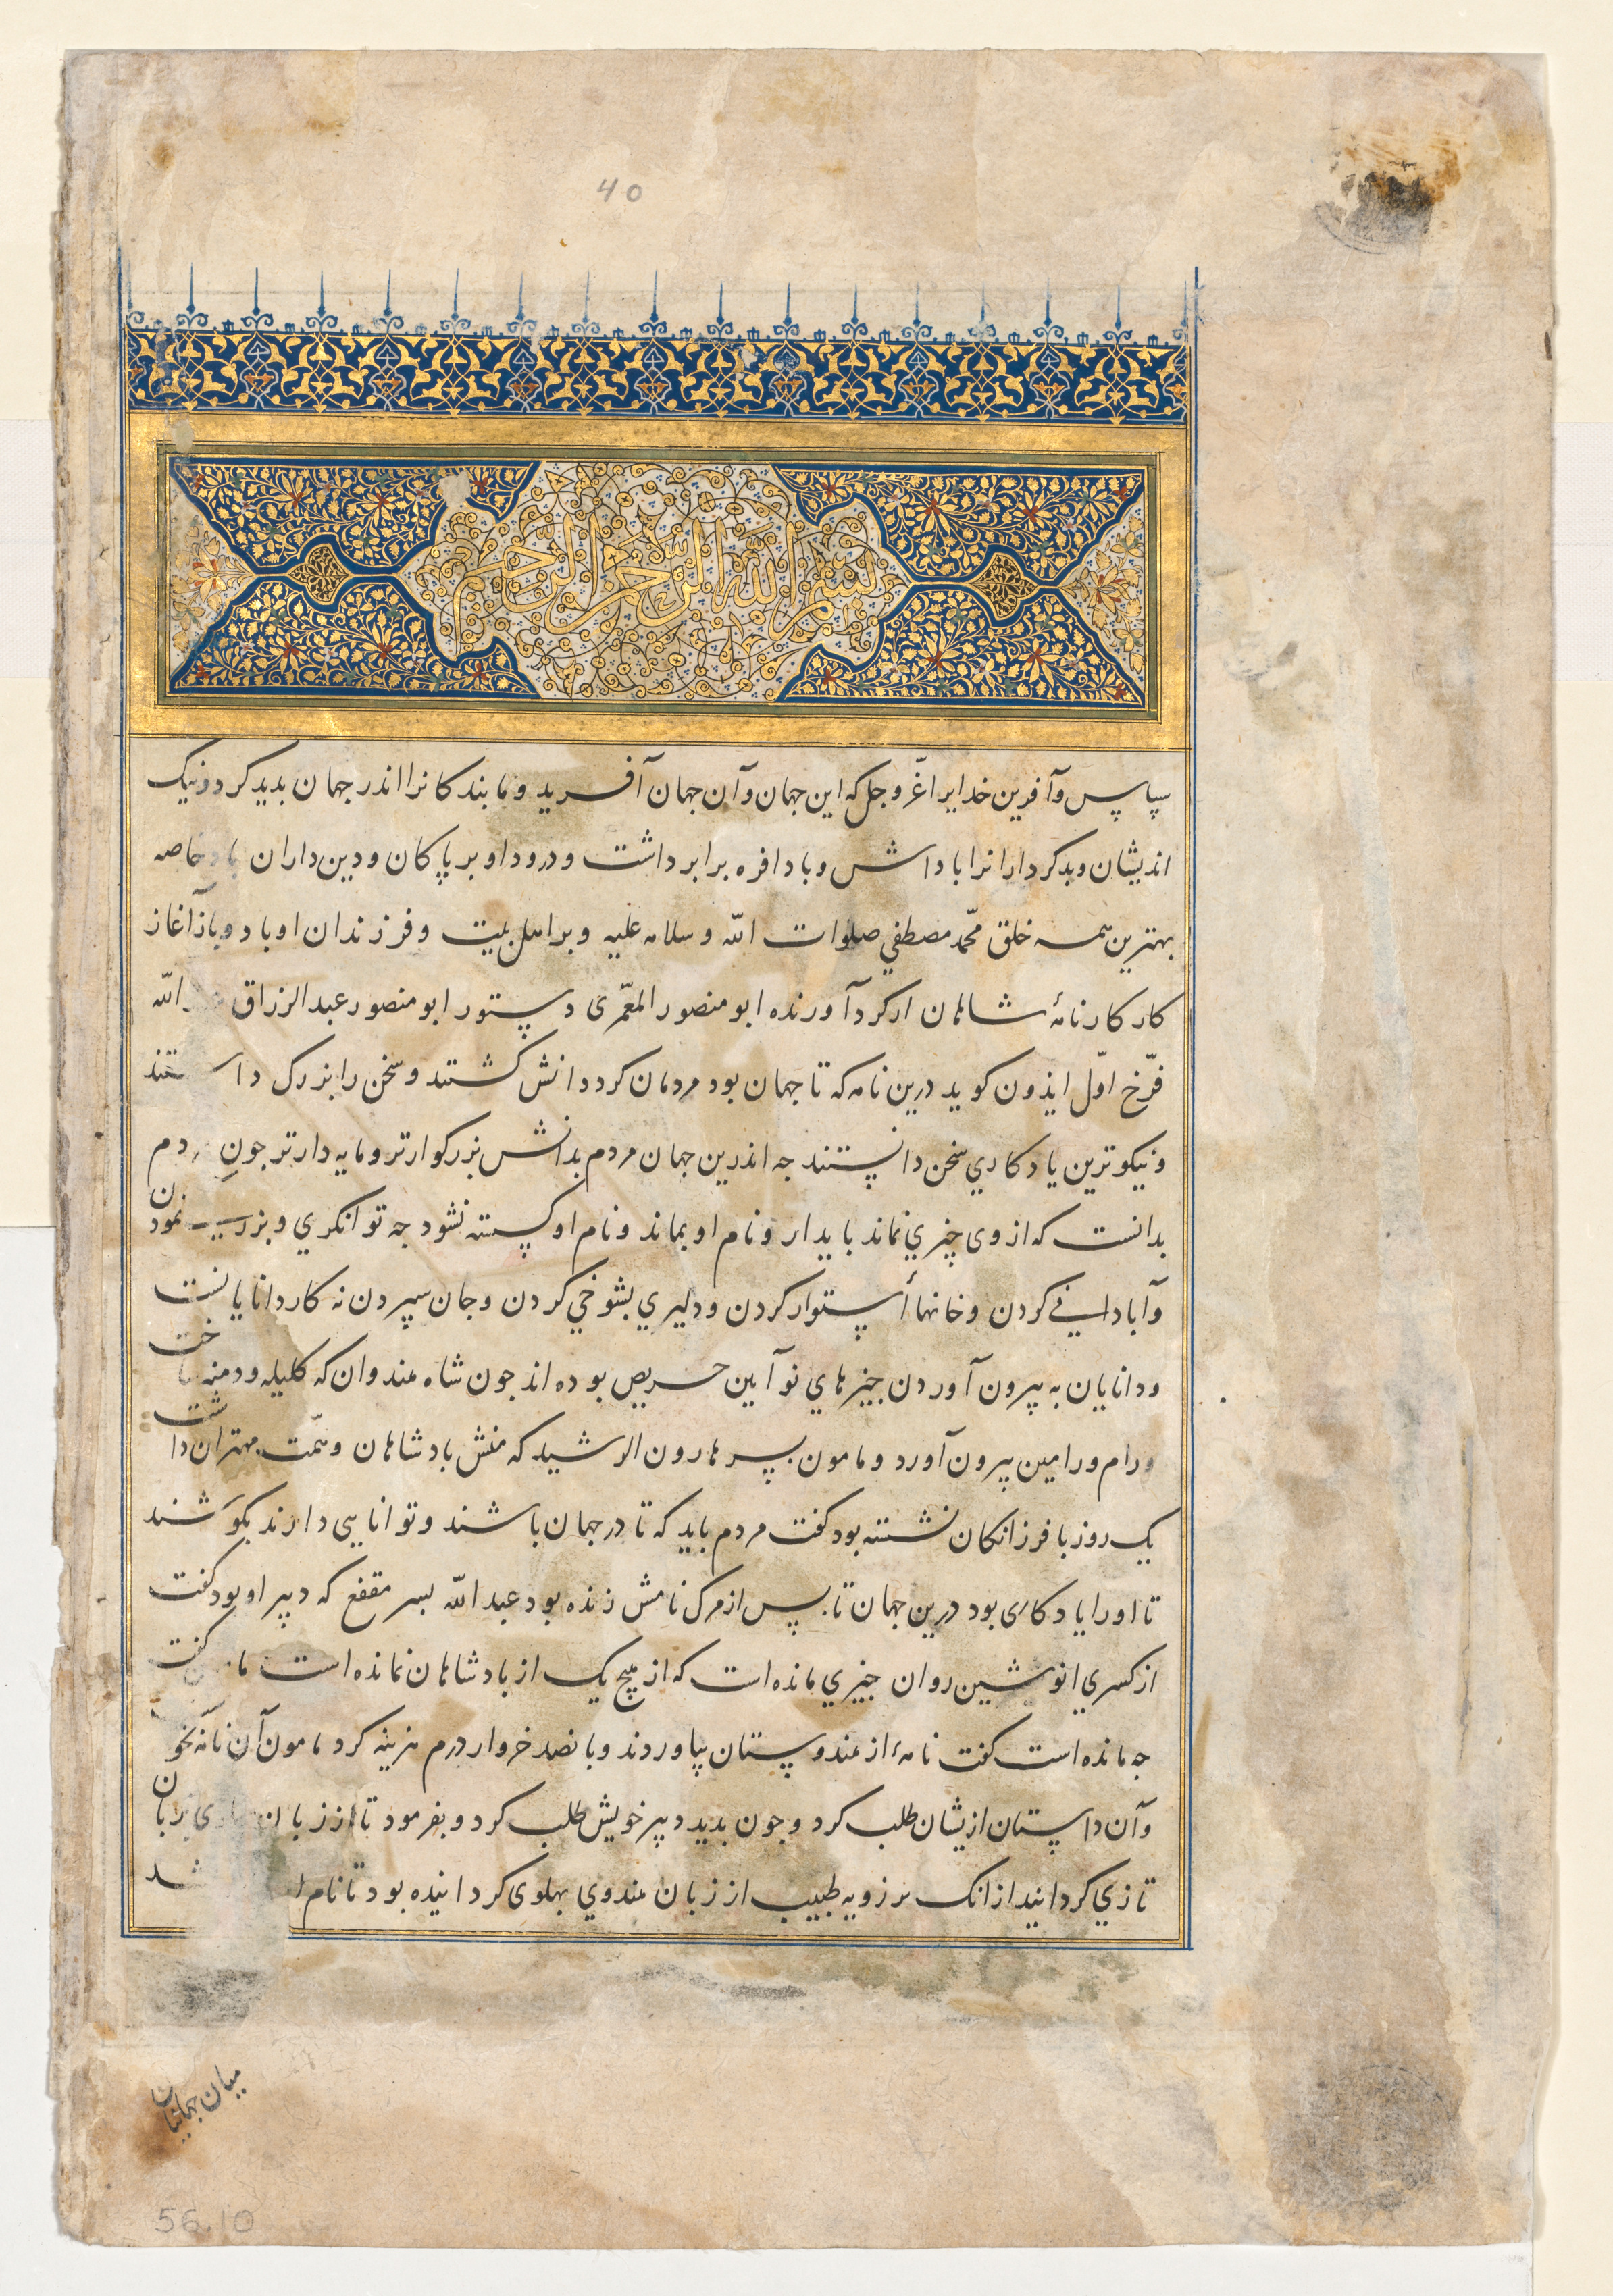 Preface (verso) from a double-page frontispiece of a Shahnama of Firdausi (940-1019 or 1025)